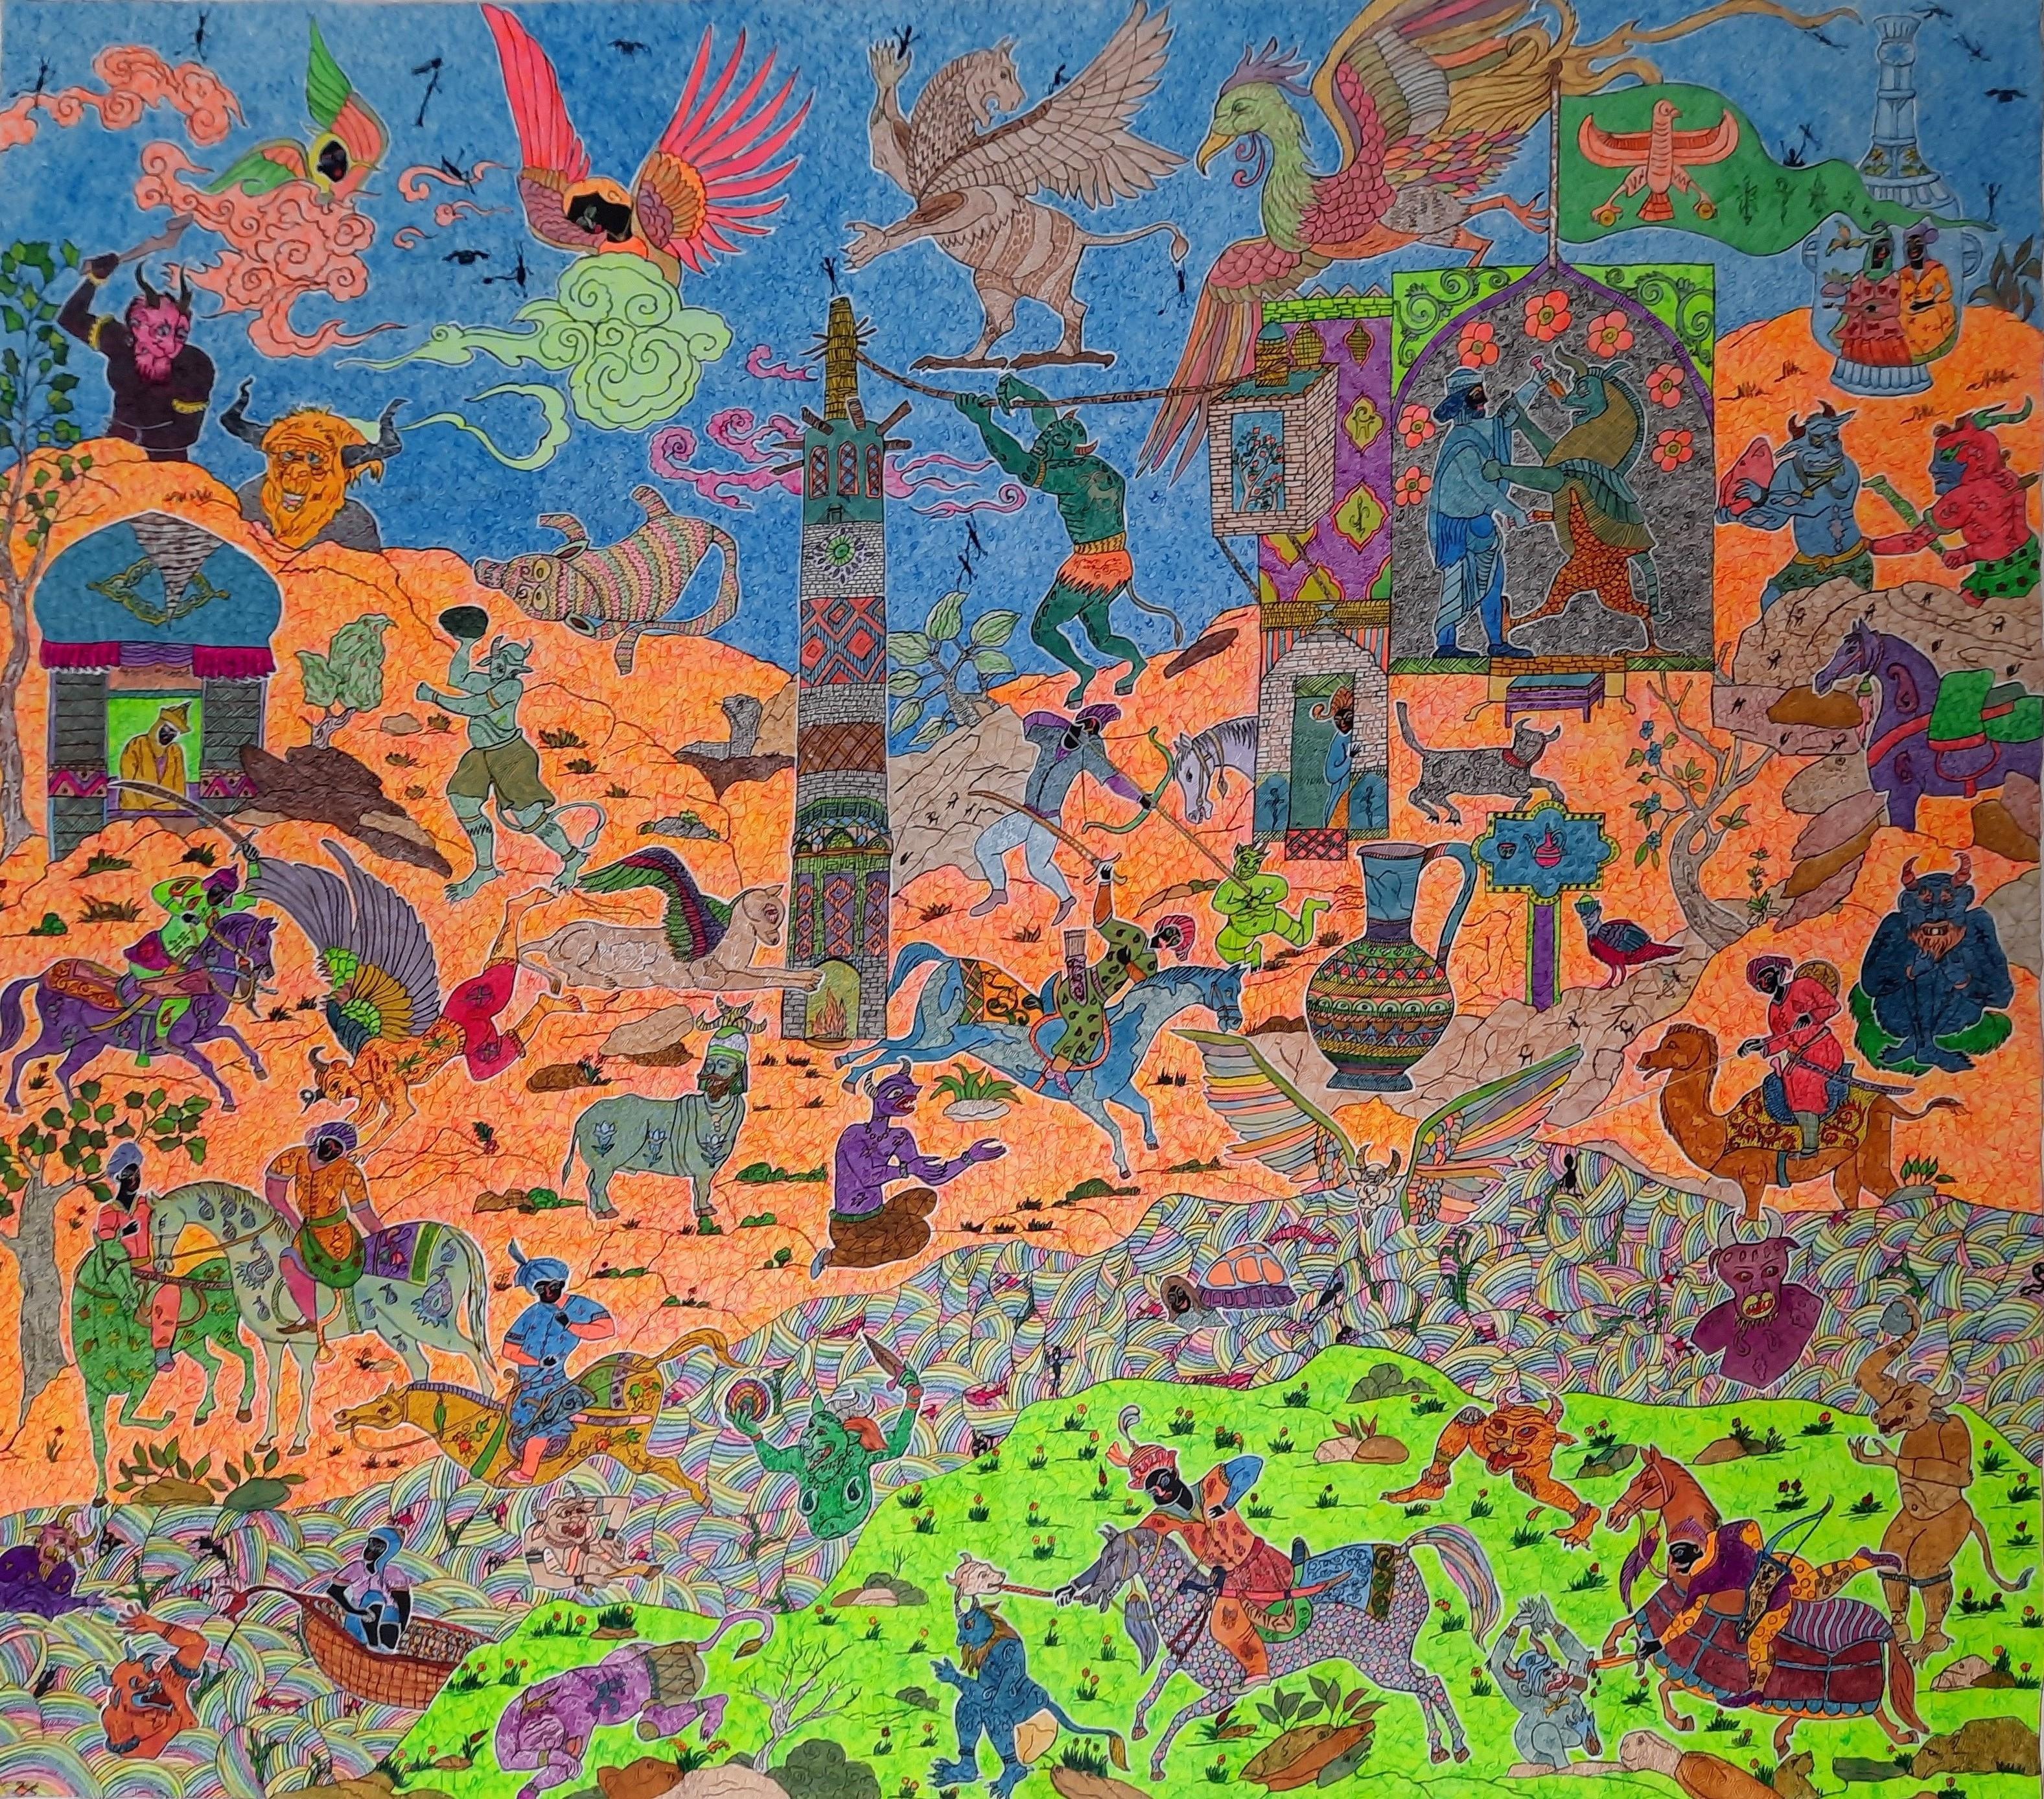 Acrylic painting on canvas
Unique work
Coming from the artist's studio

This painting refers to Iran 1000 years ago.
It is the story of Shahnameh.
The painting illustrates the stories of Rostam and Sohrab, and the stories of Iranian athletes during